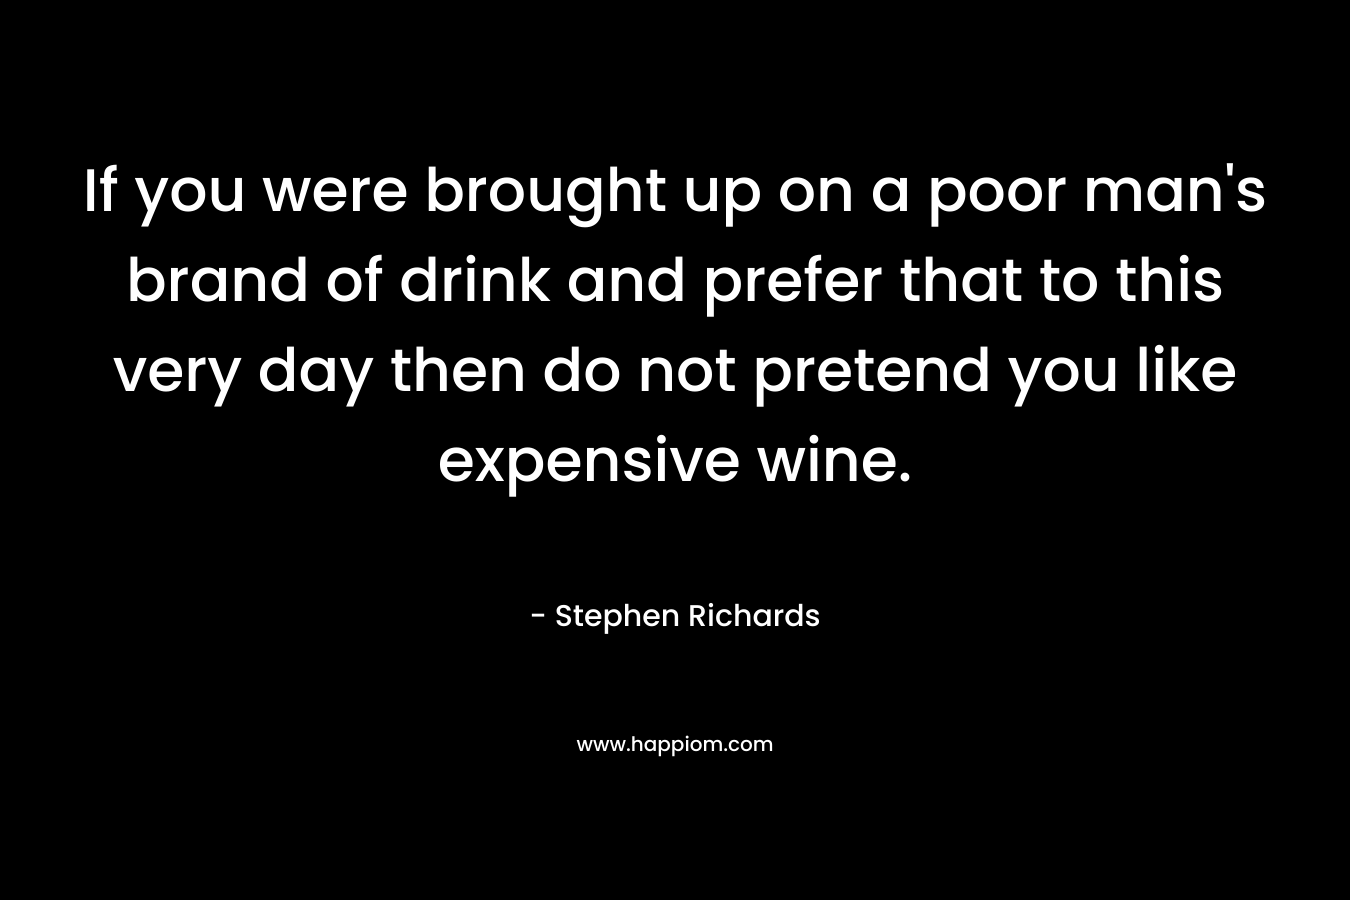 If you were brought up on a poor man's brand of drink and prefer that to this very day then do not pretend you like expensive wine.